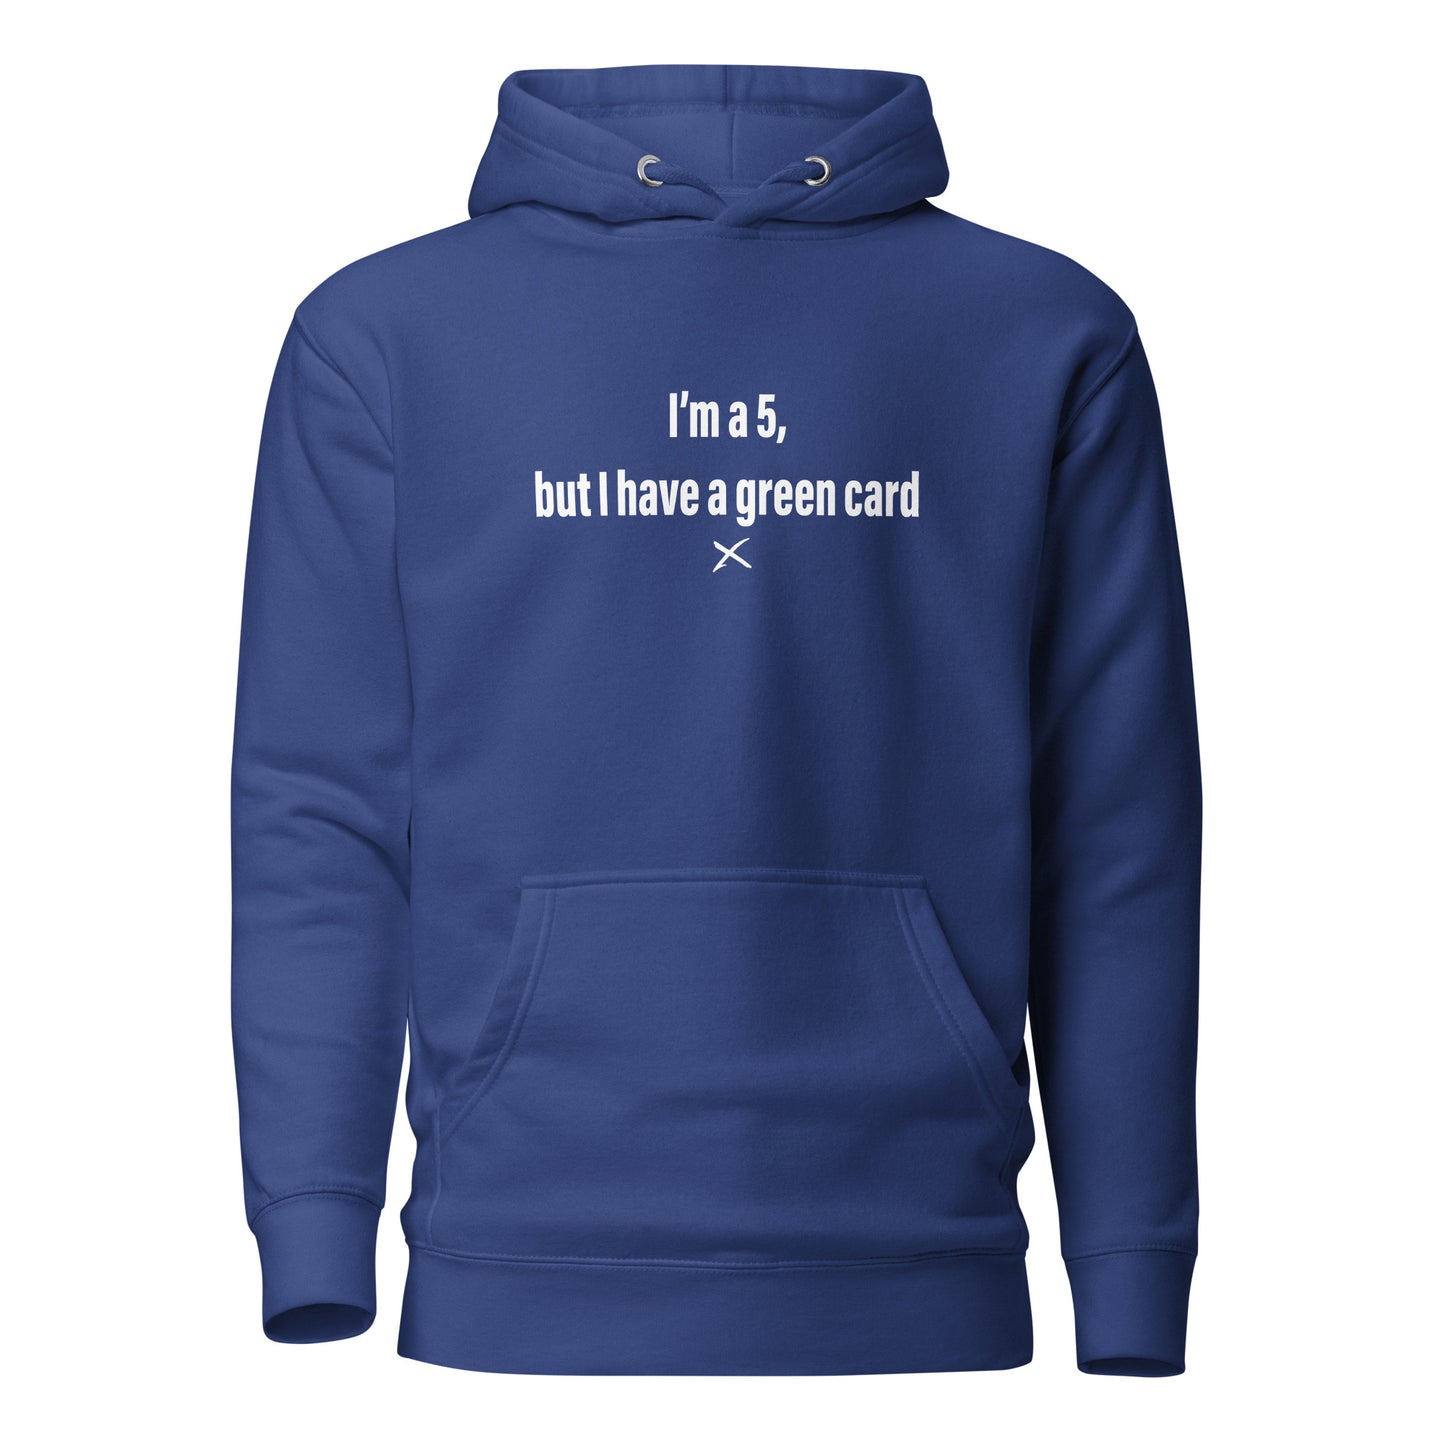 I'm a 5, but I have a green card - Hoodie